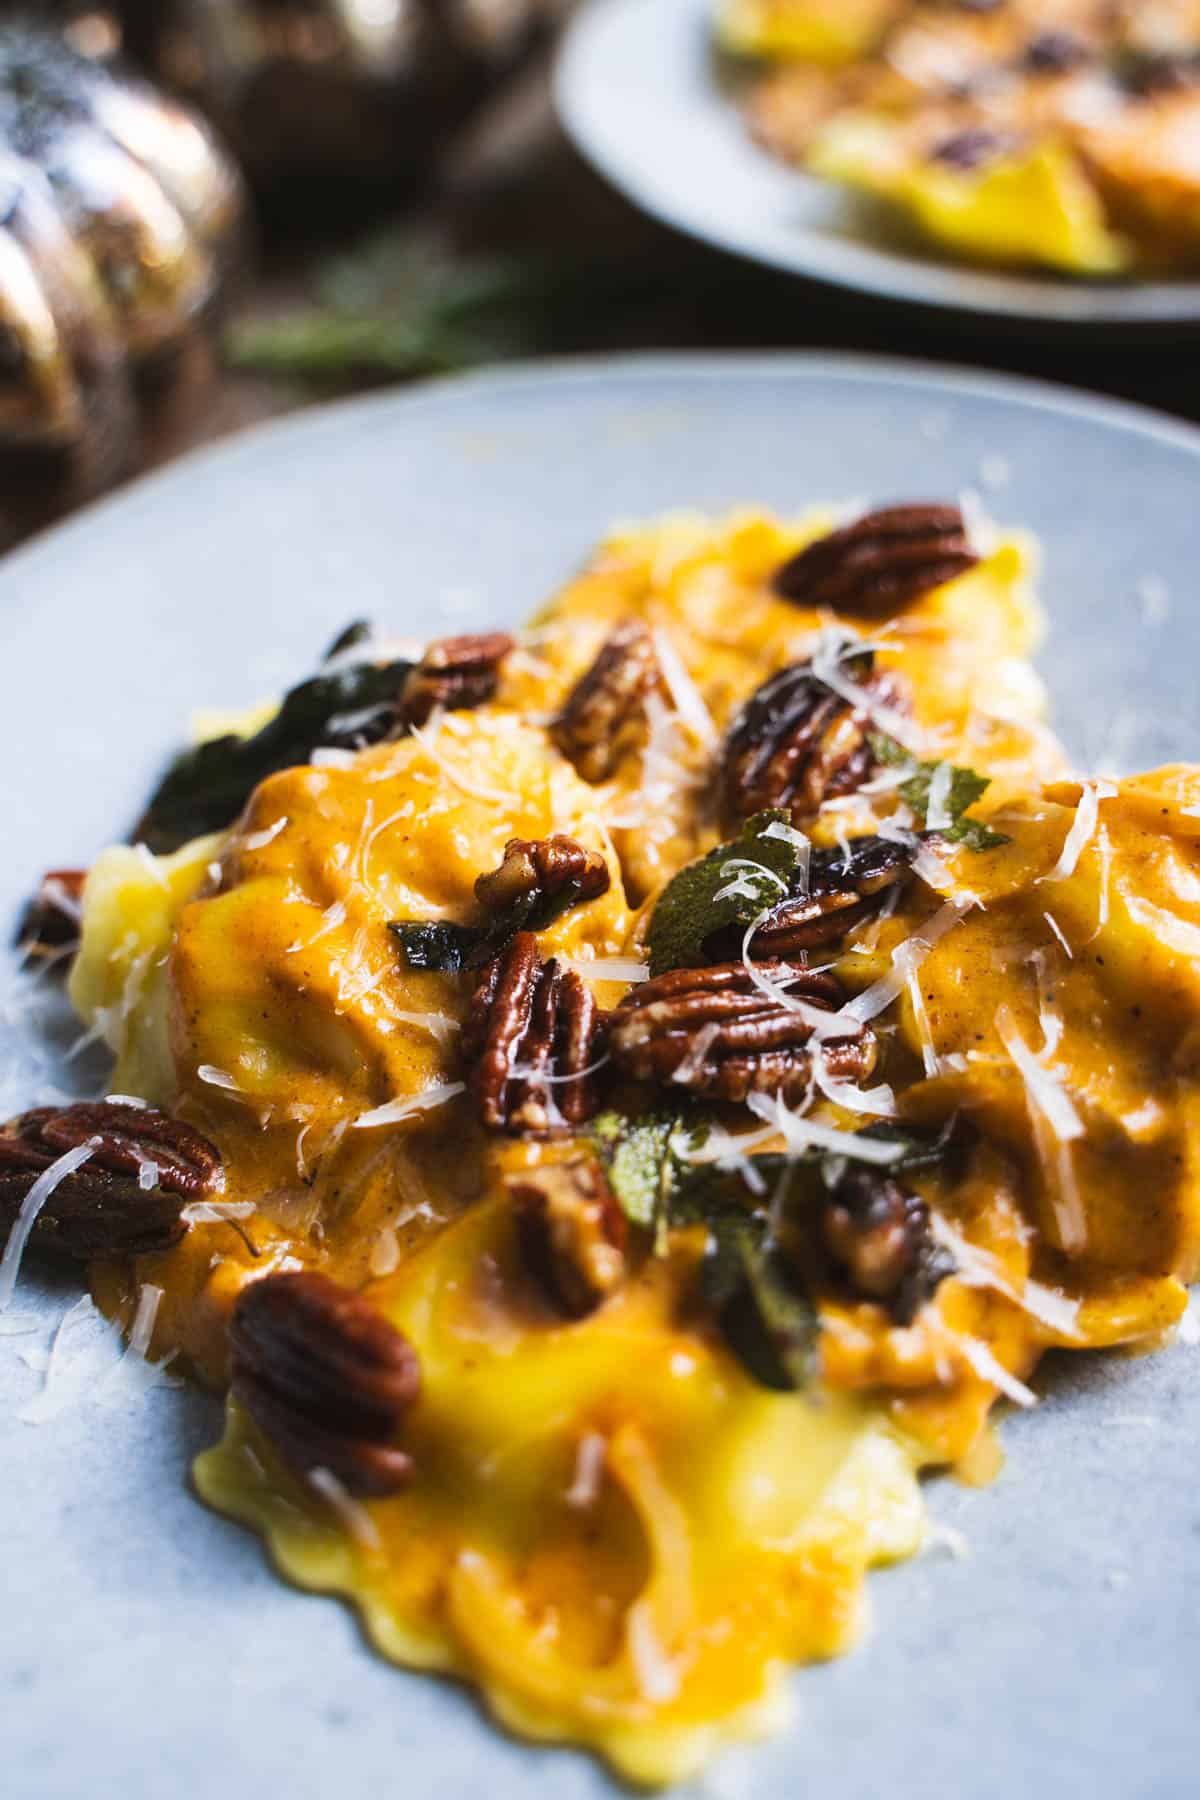 Pumpkin sauce for pasta tossed with cheese ravioli with crispy fried sage leaves and toasted pecans on the top served on a blue plate.